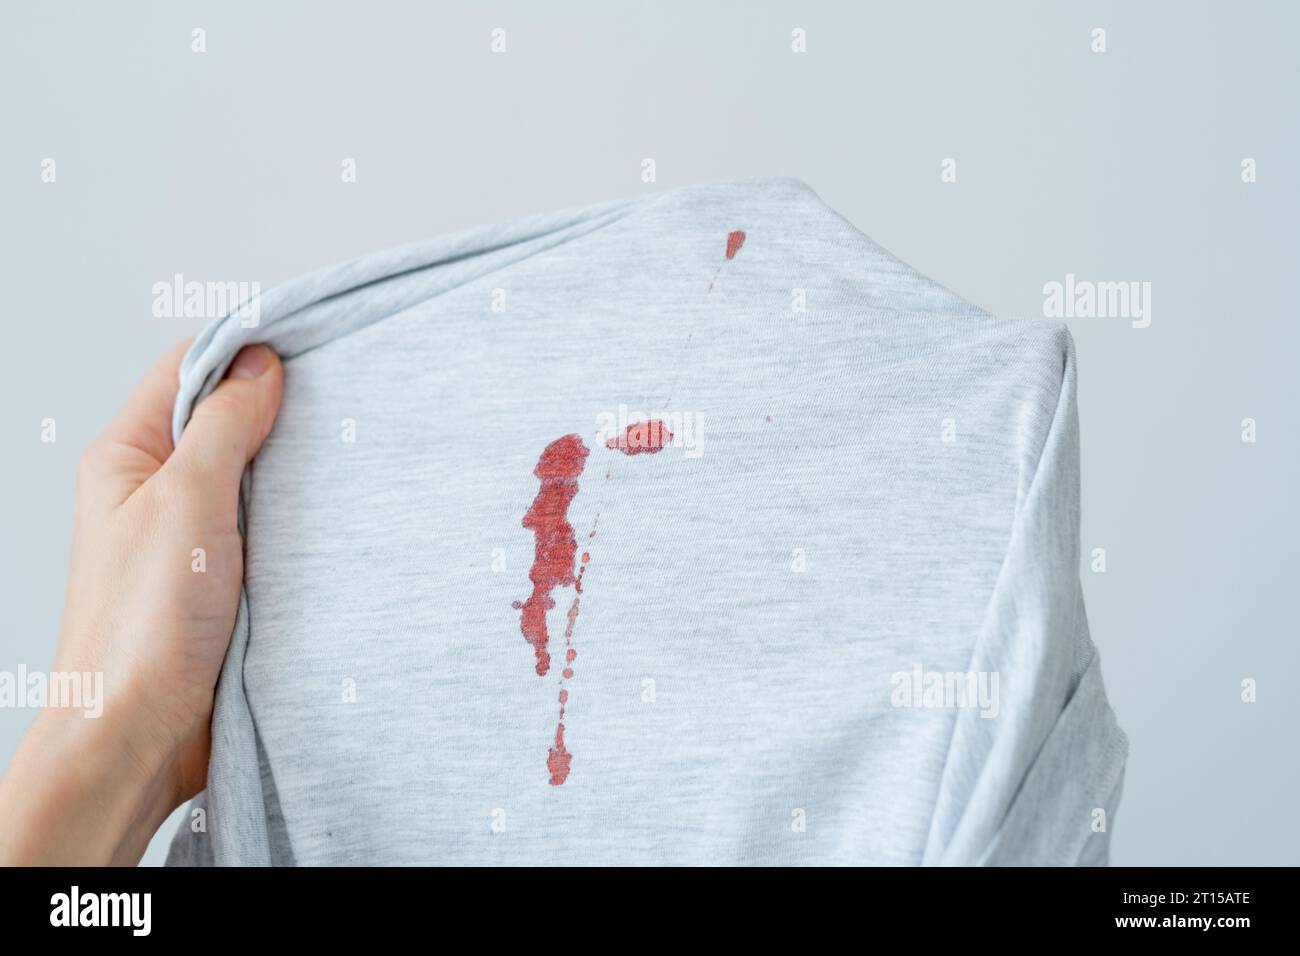 Drop stain of blood on a white t-shirt. daily life stain concept Stock Photo